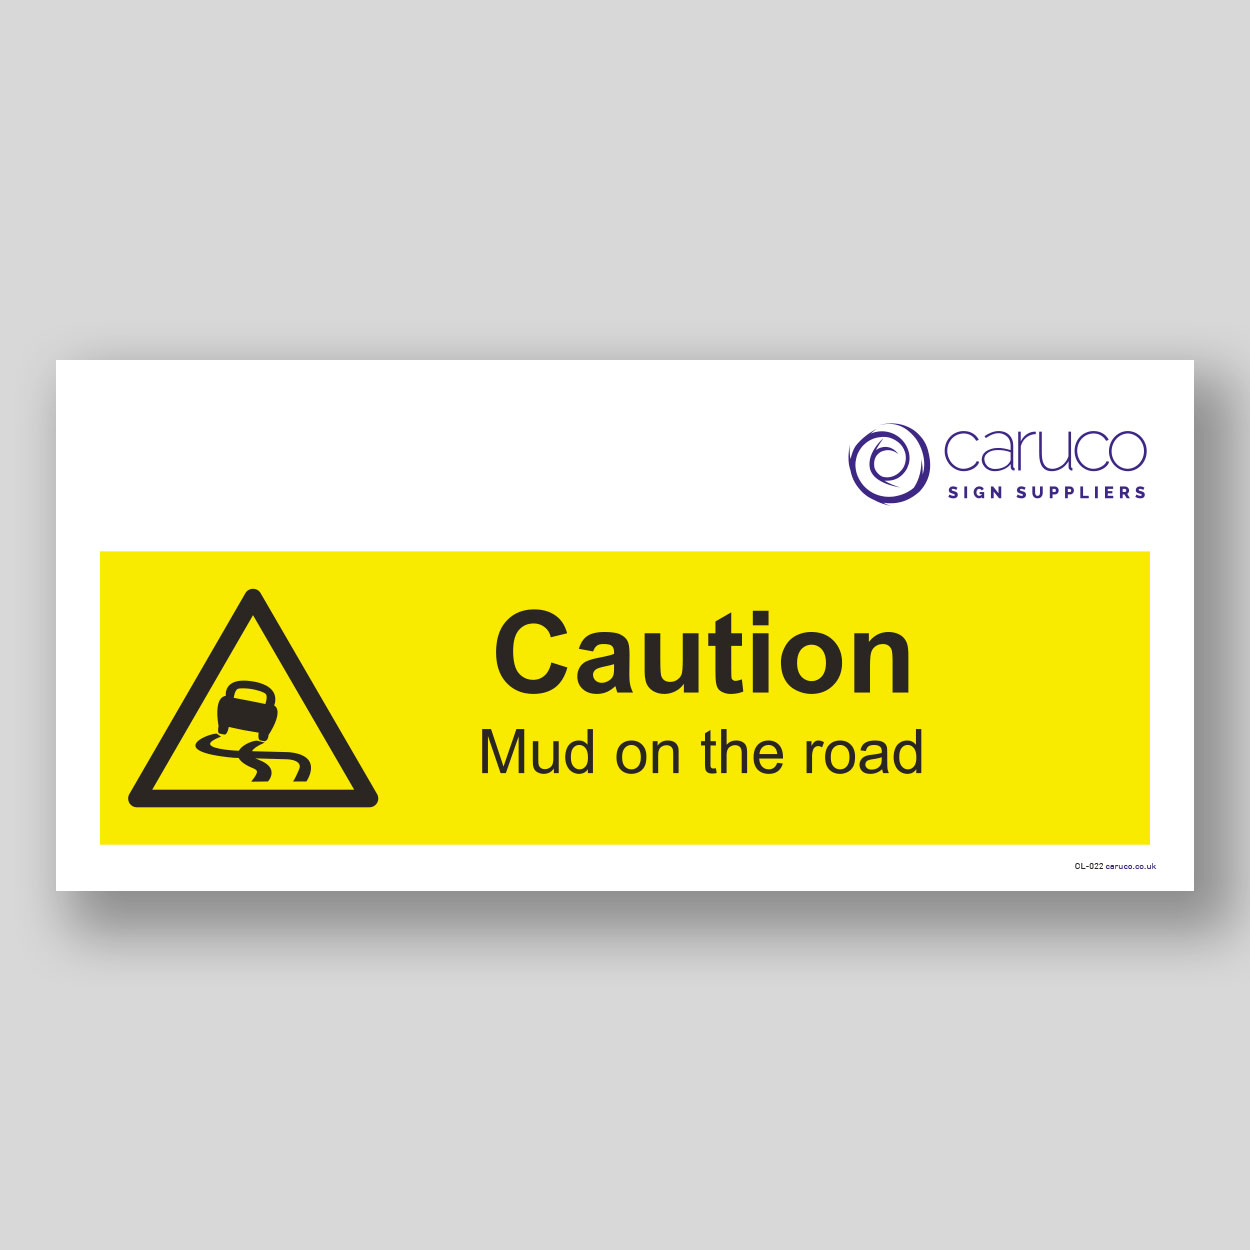 CL-022 Caution - mud on road